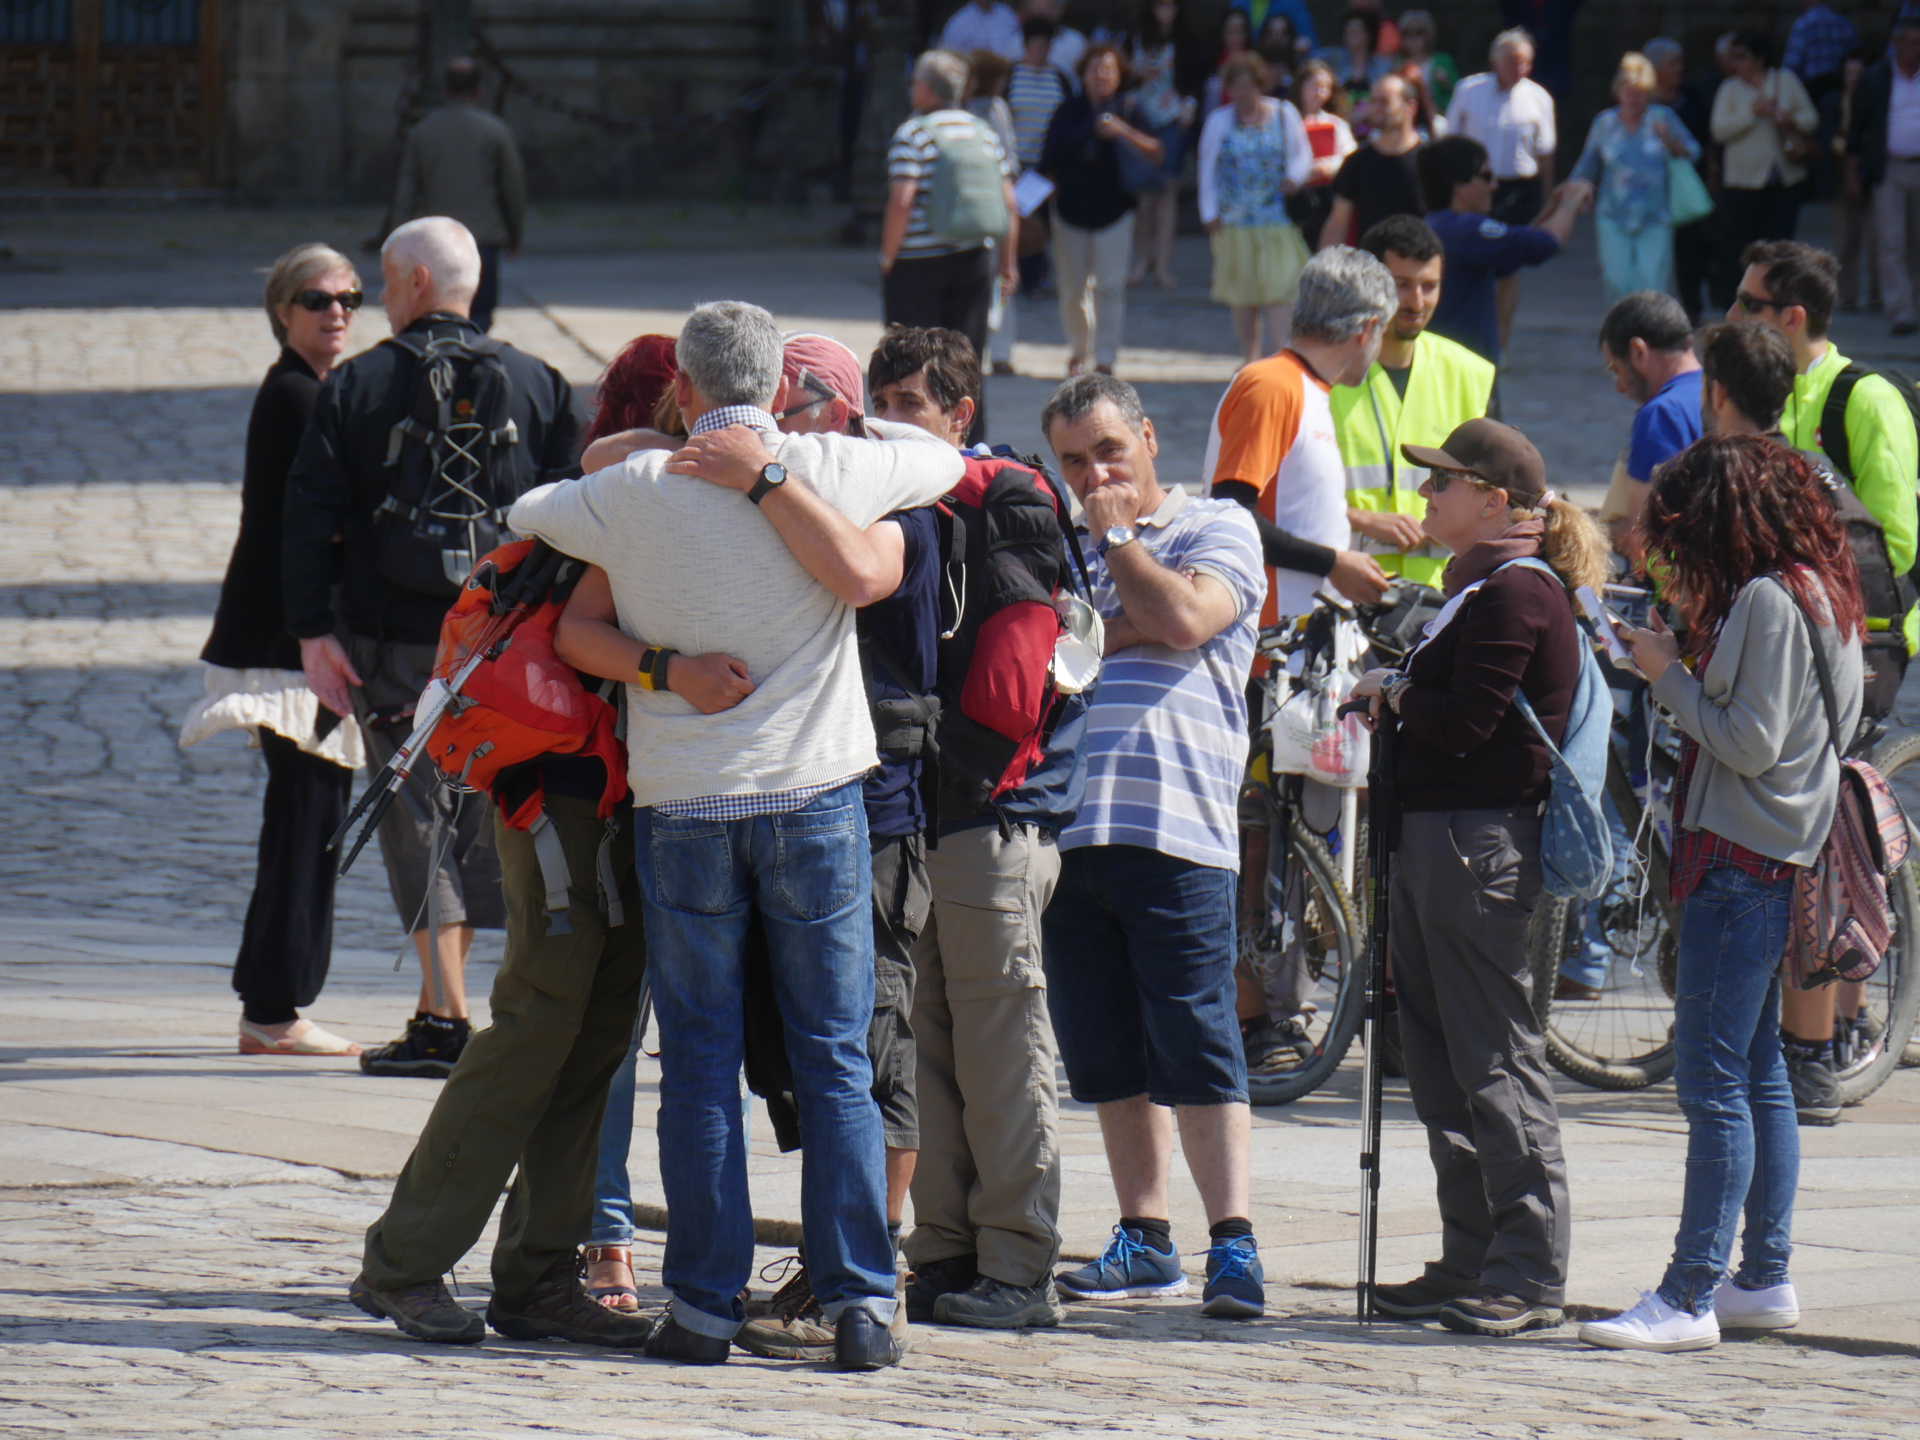 A group of friends hugs in the plaza in front of the Santiago de Compostela Cathedral.